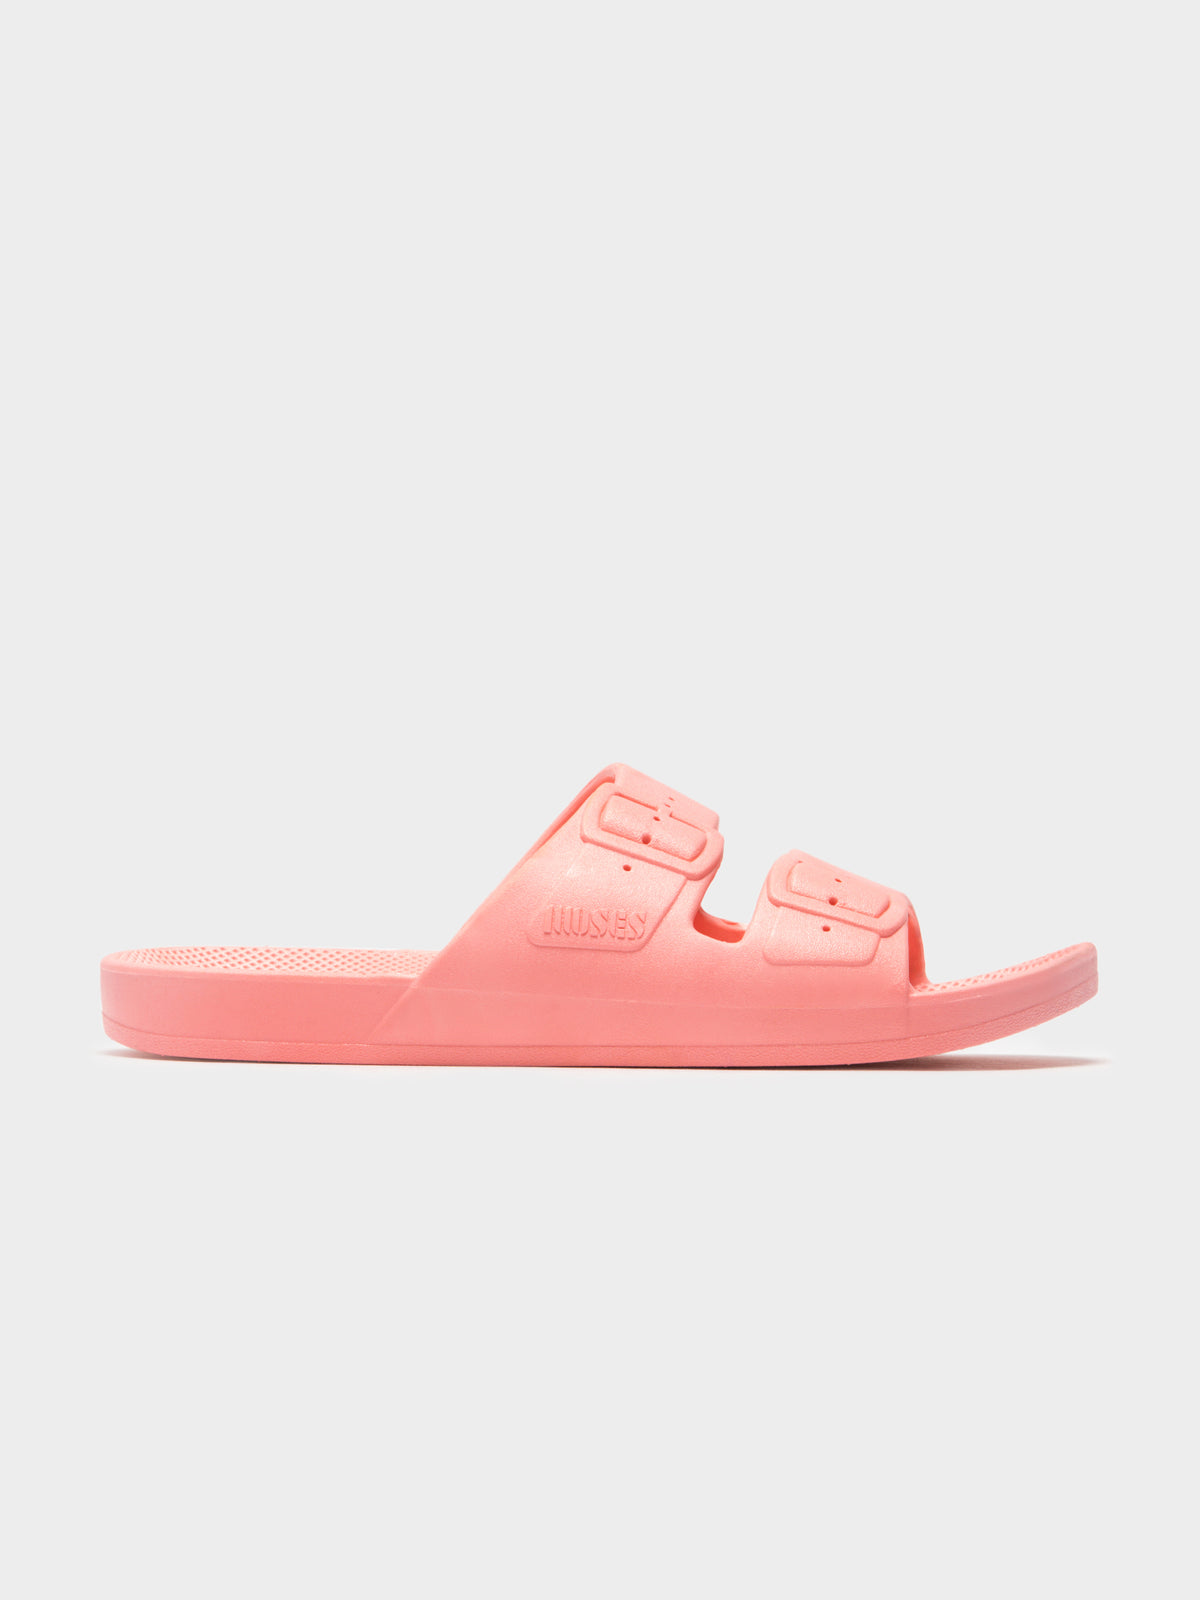 Womens Freedom Moses Slides in Pink Martini